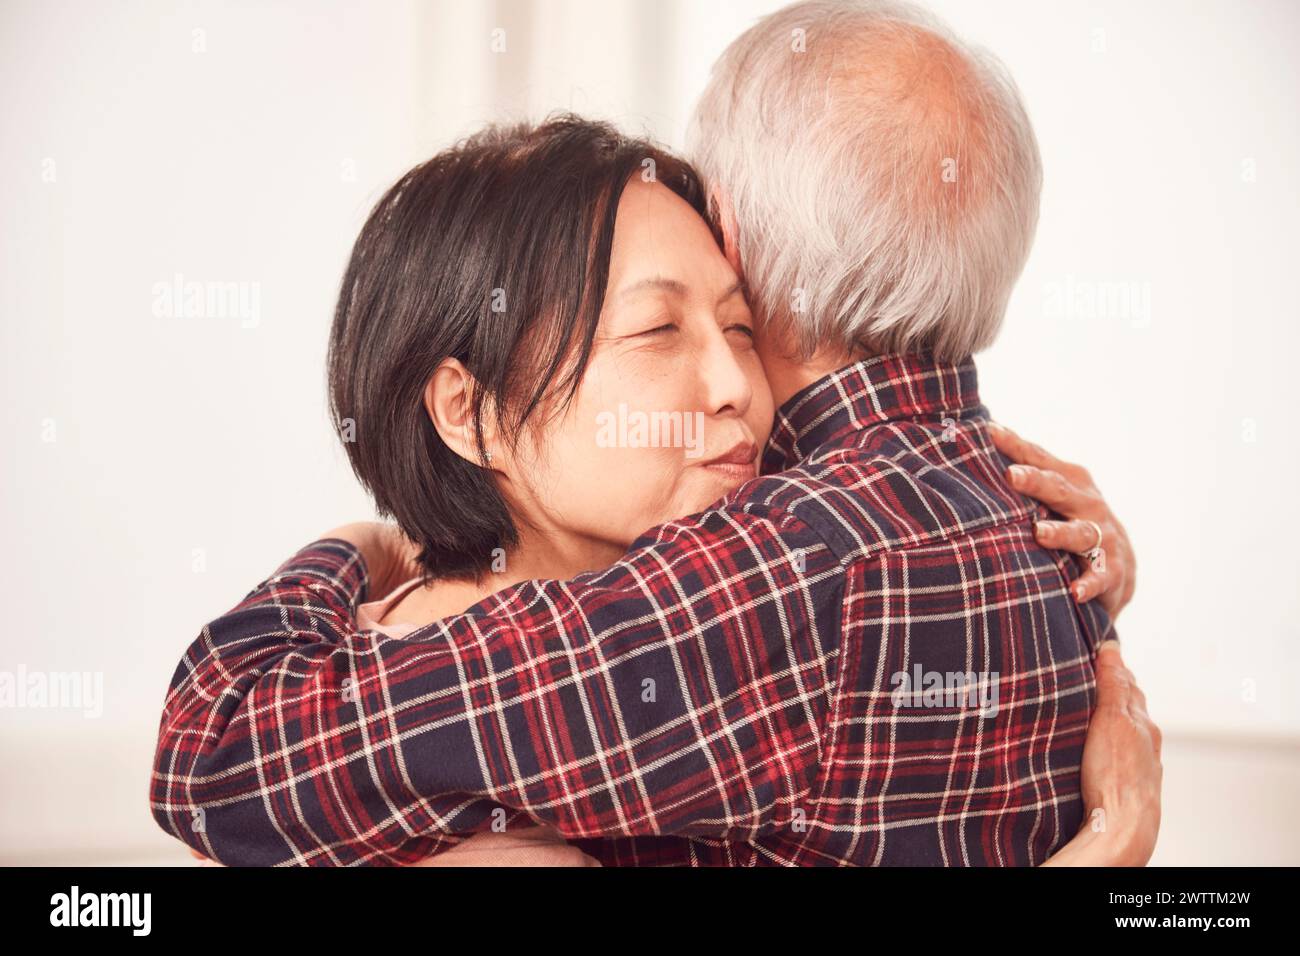 Warm embrace between two adults Stock Photo